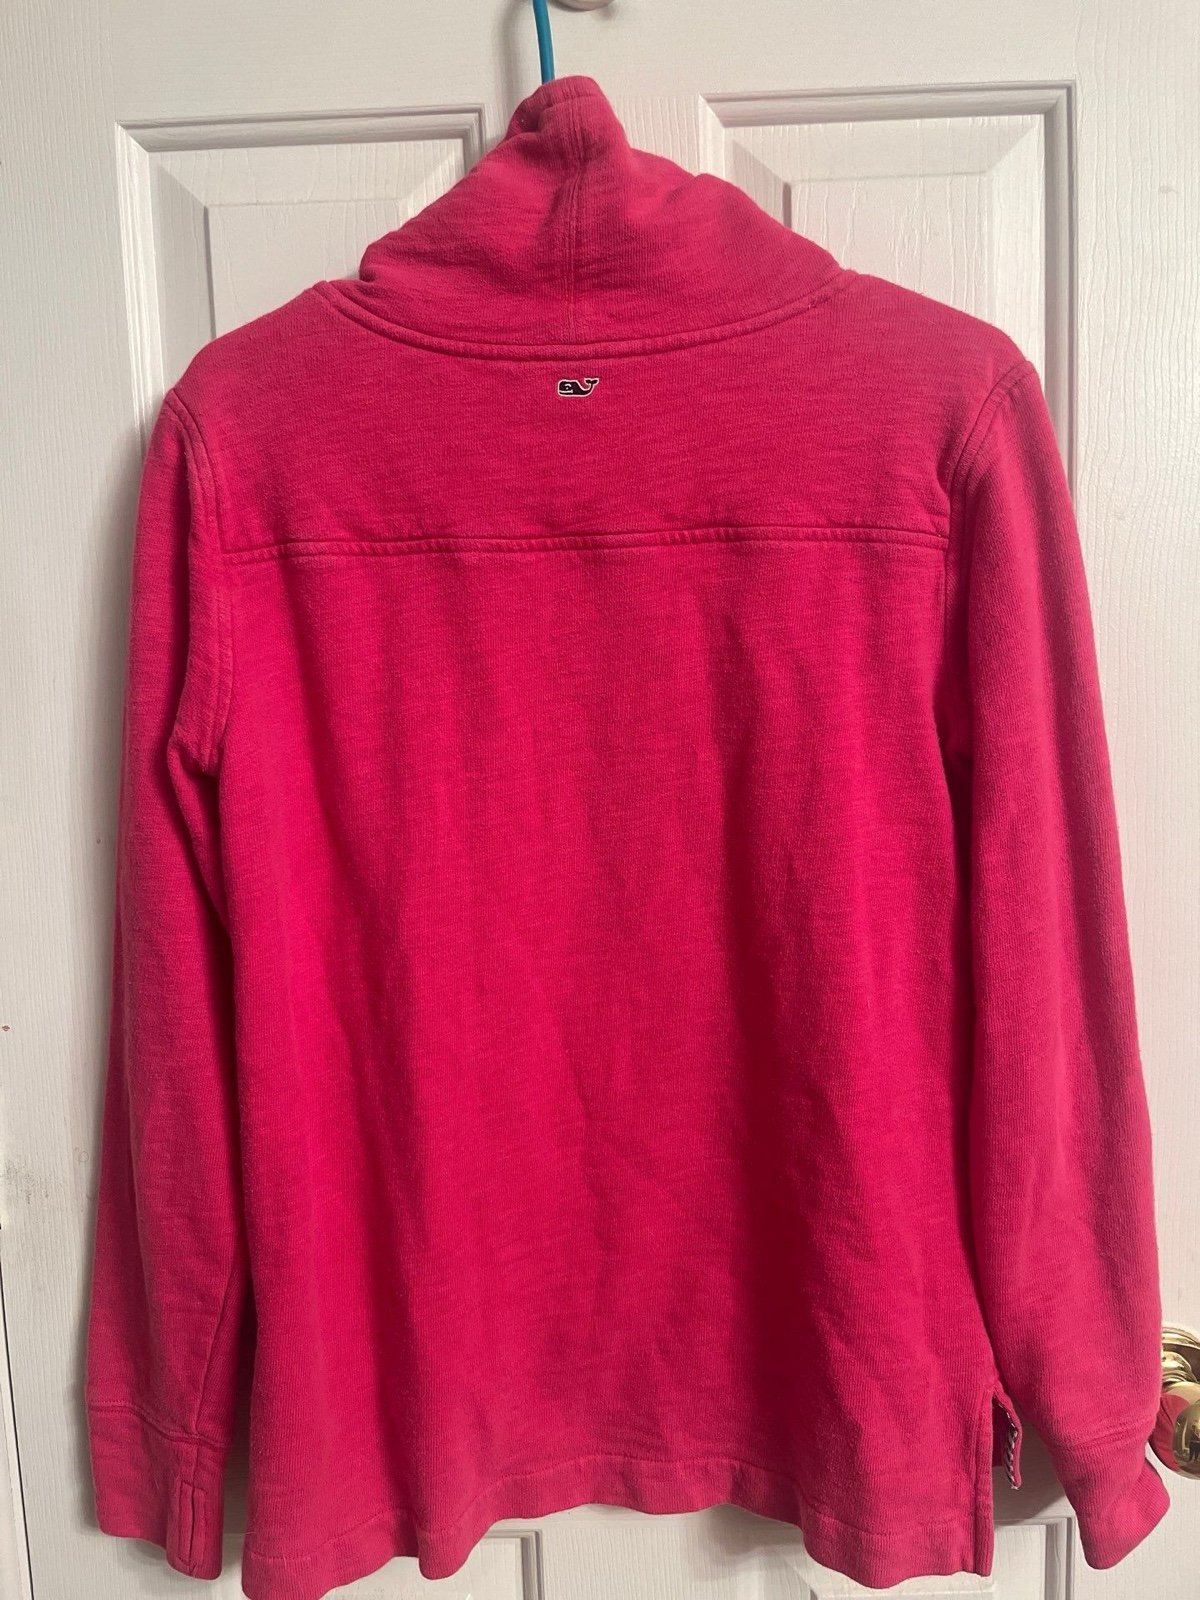 Great vineyard vines pullover lM6sZ2LVO New Style